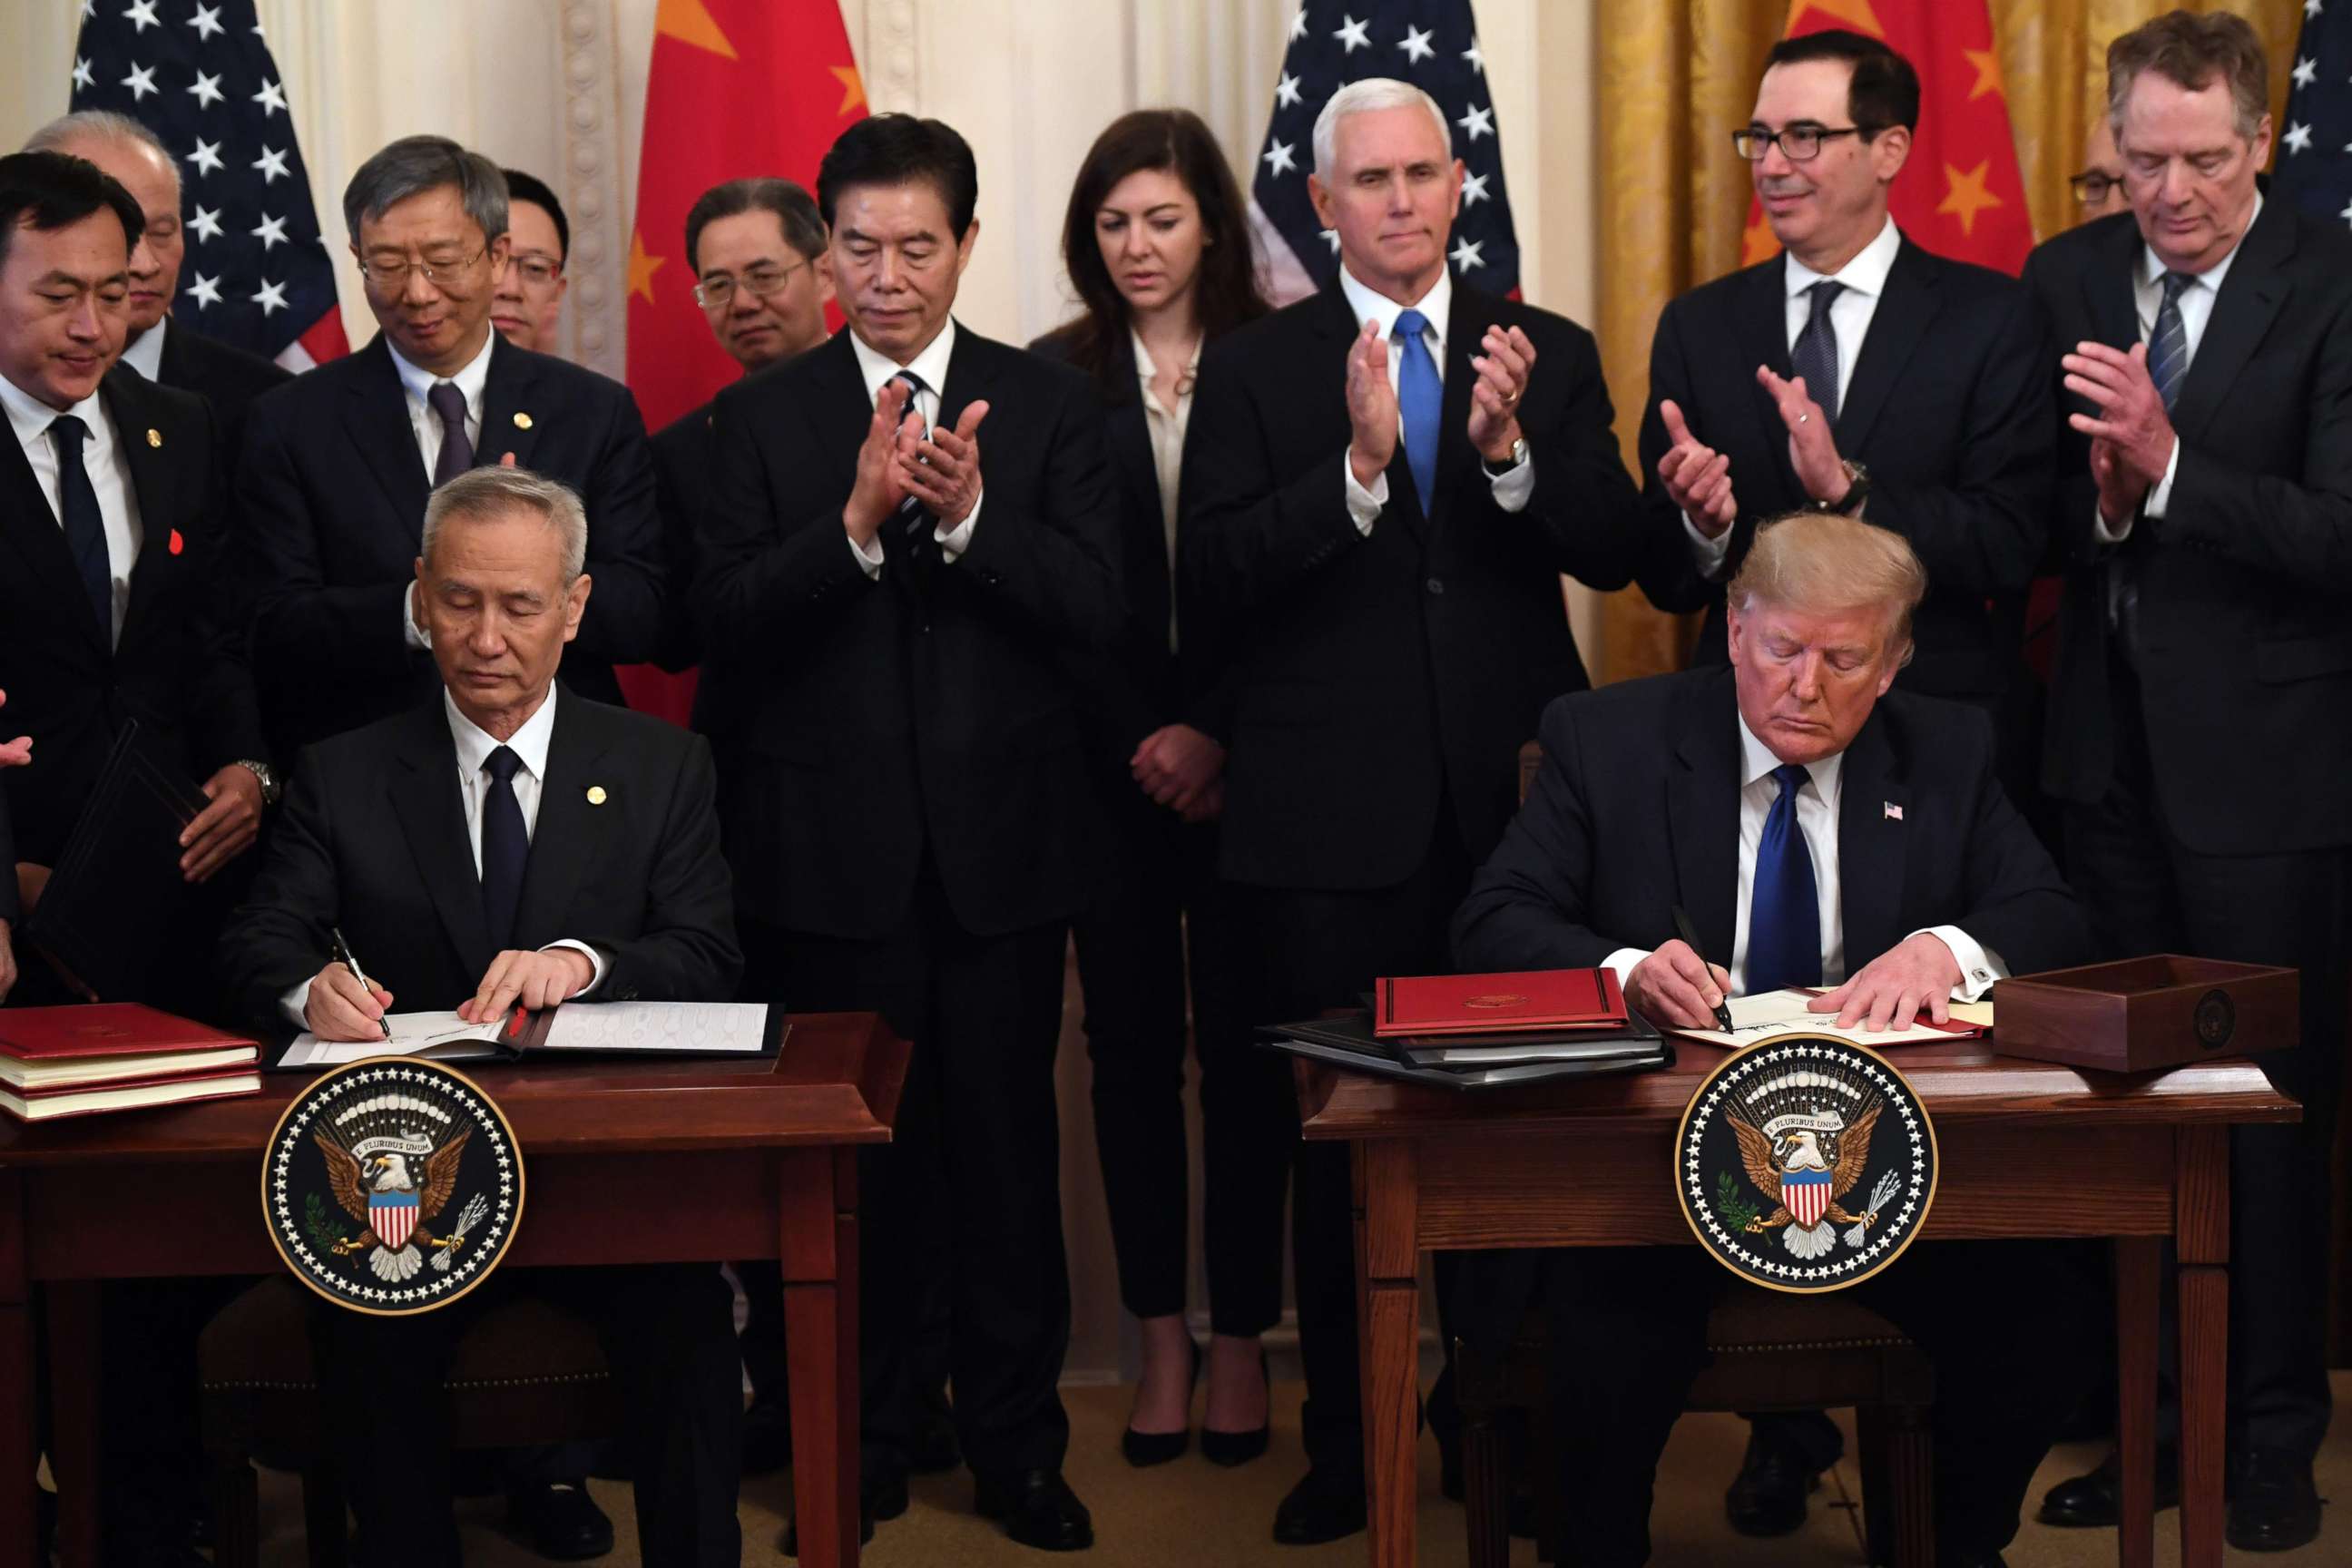 PHOTO: President Donald Trump and Chinese Vice Premier Liu He, sign a trade agreement between the U.S. and China during a ceremony in the East Room of the White House in Washington, Jan. 15, 2020.